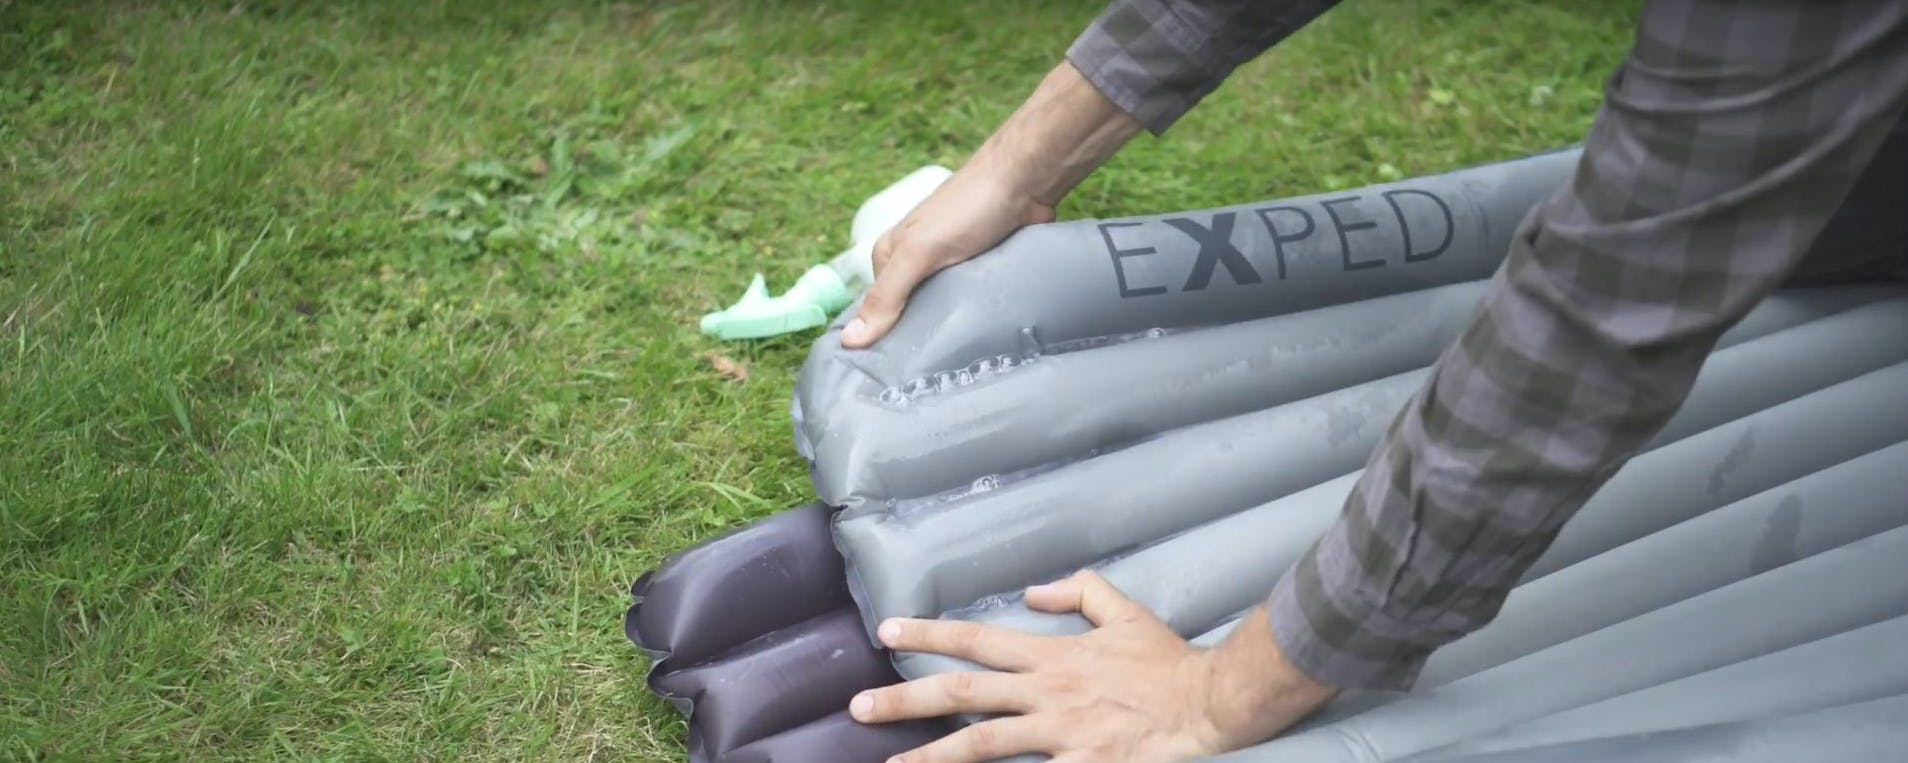 How to store and repair a sleeping pad